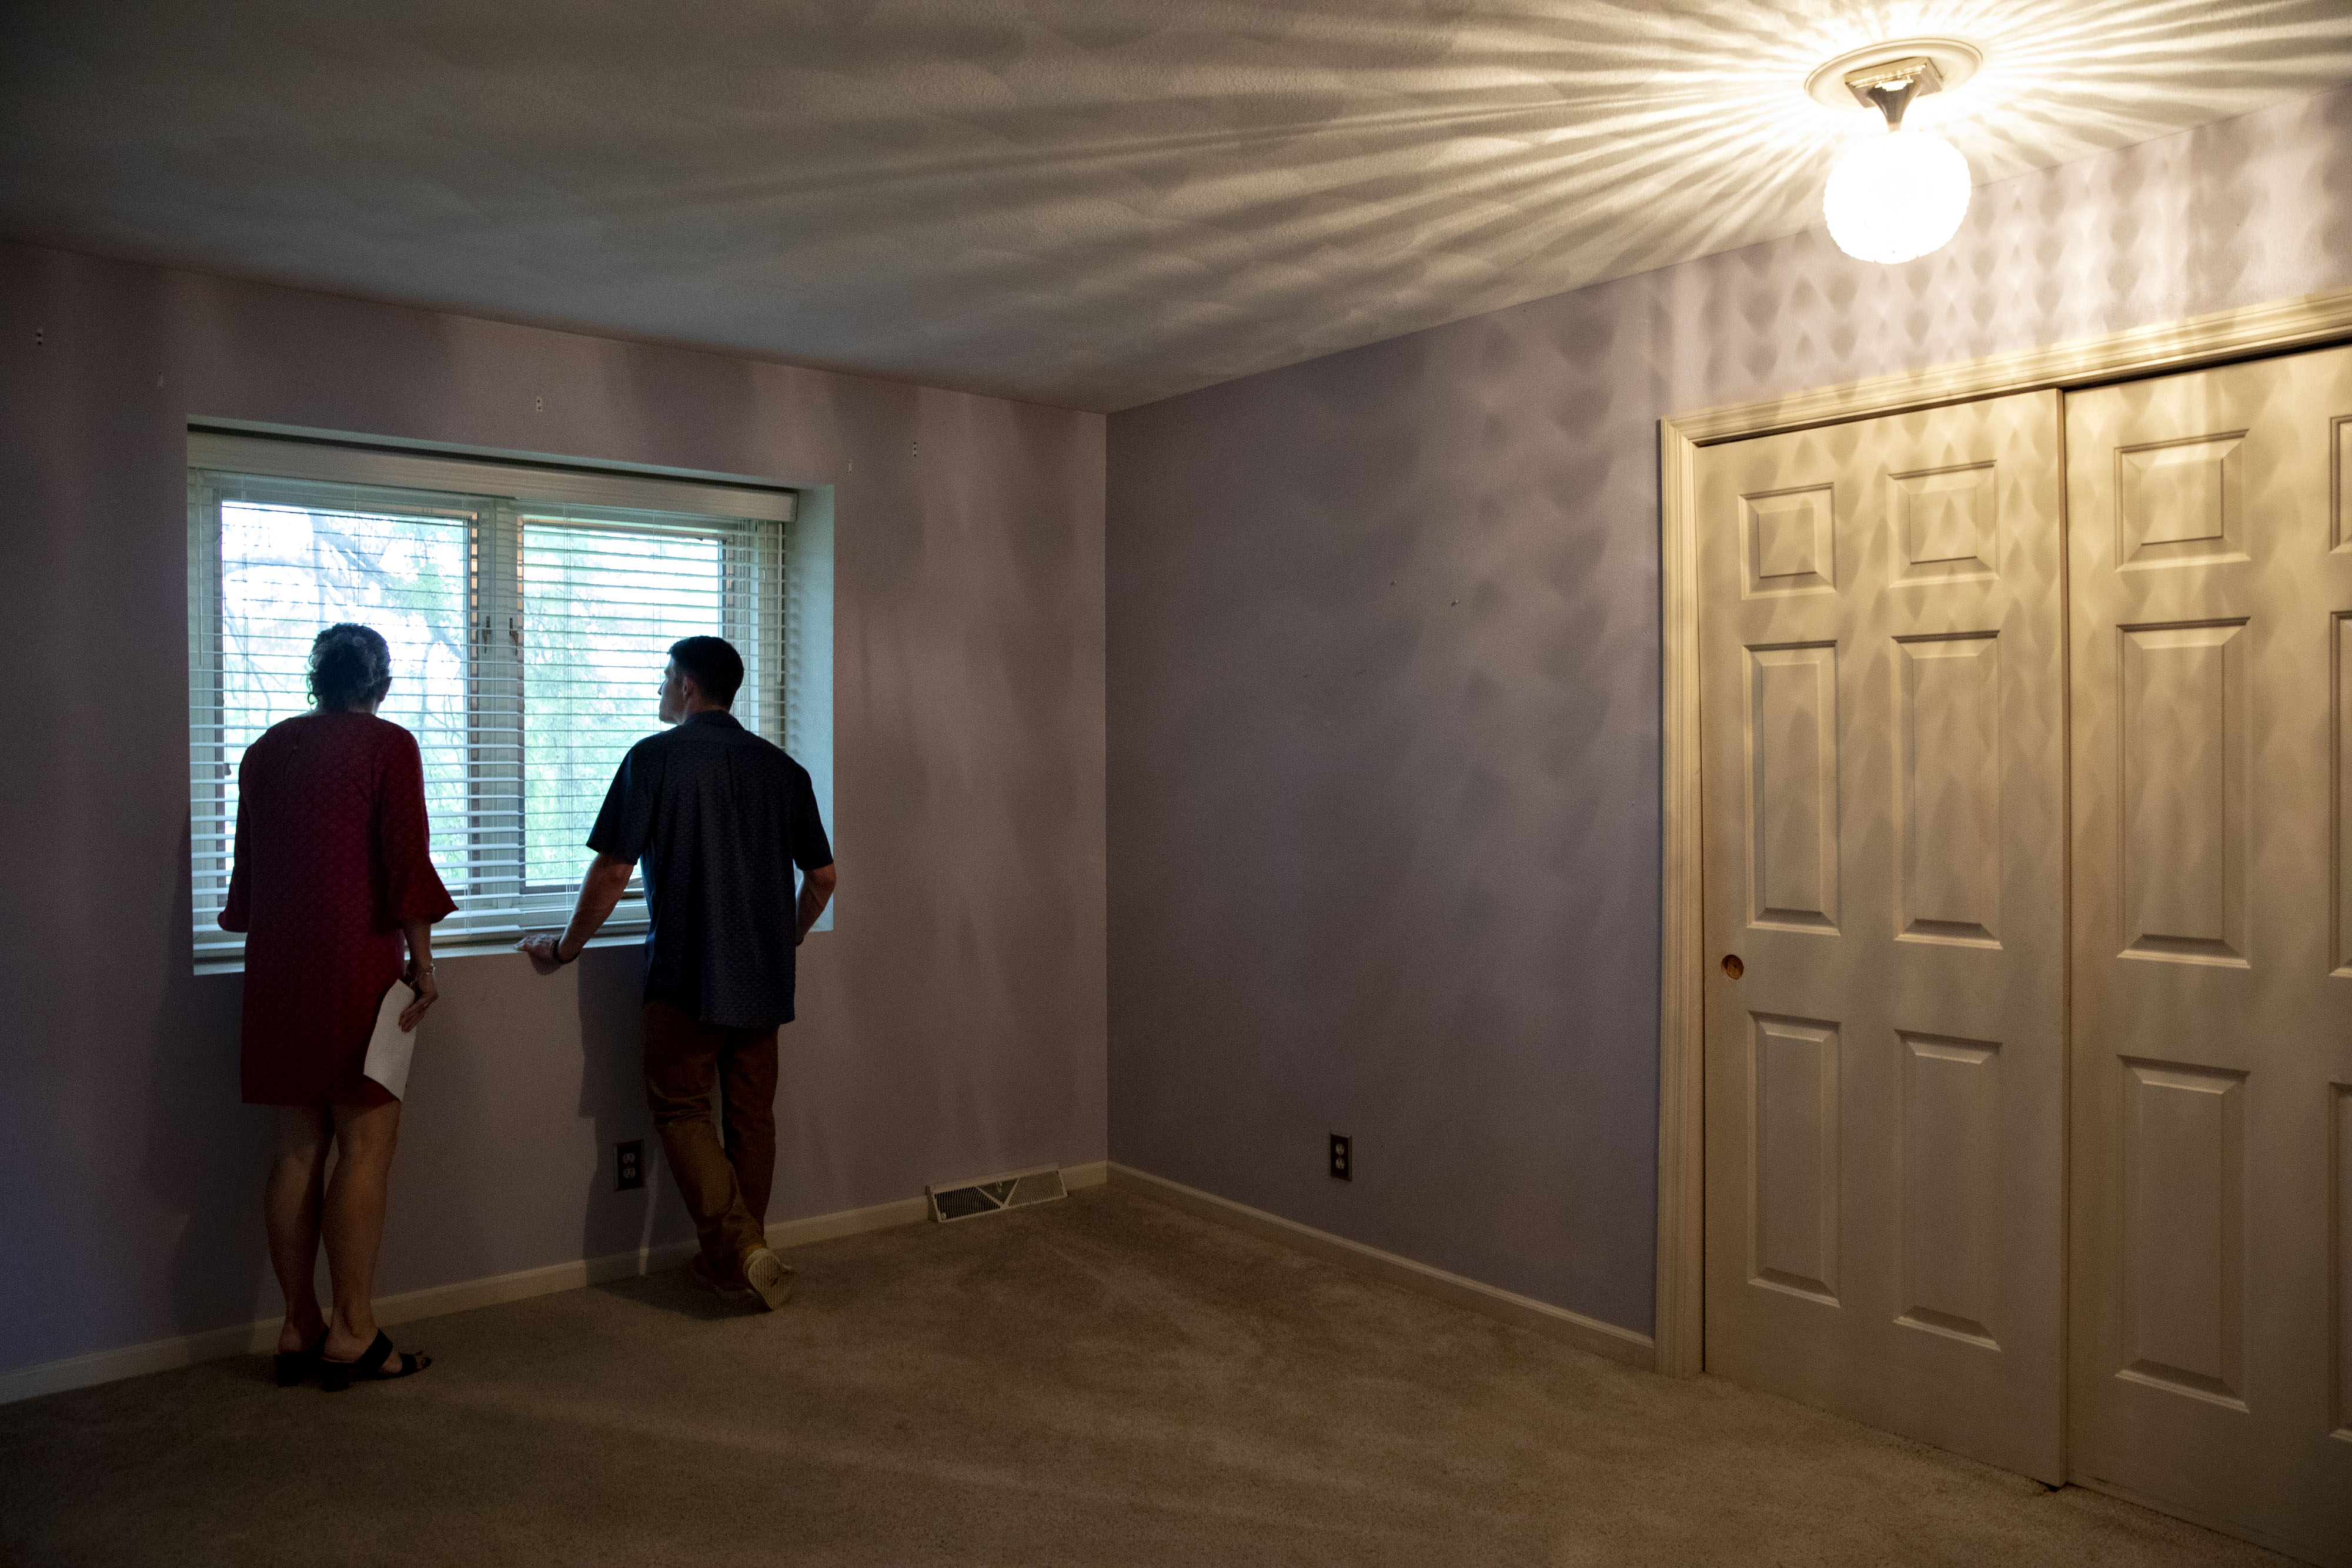 A real estate agent shows a prospective home buyer a house for sale in Peoria, Illinois.